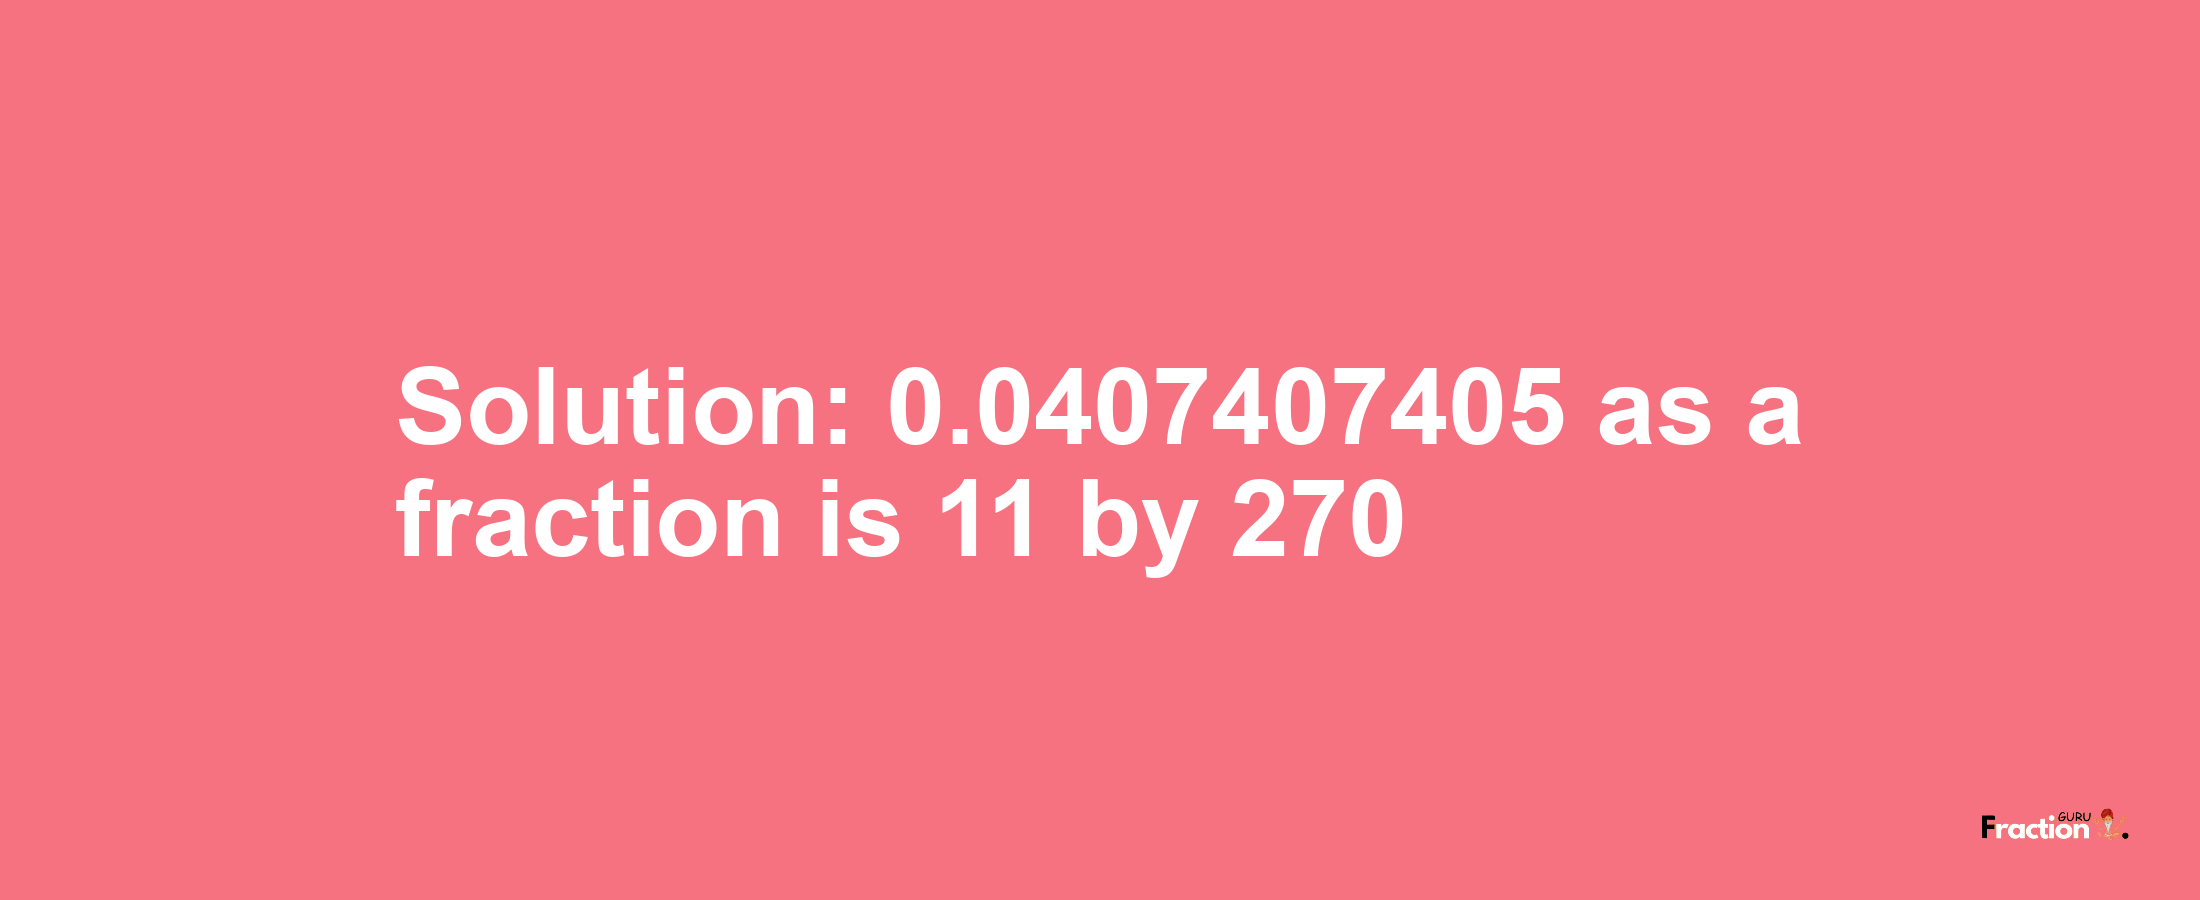 Solution:0.0407407405 as a fraction is 11/270